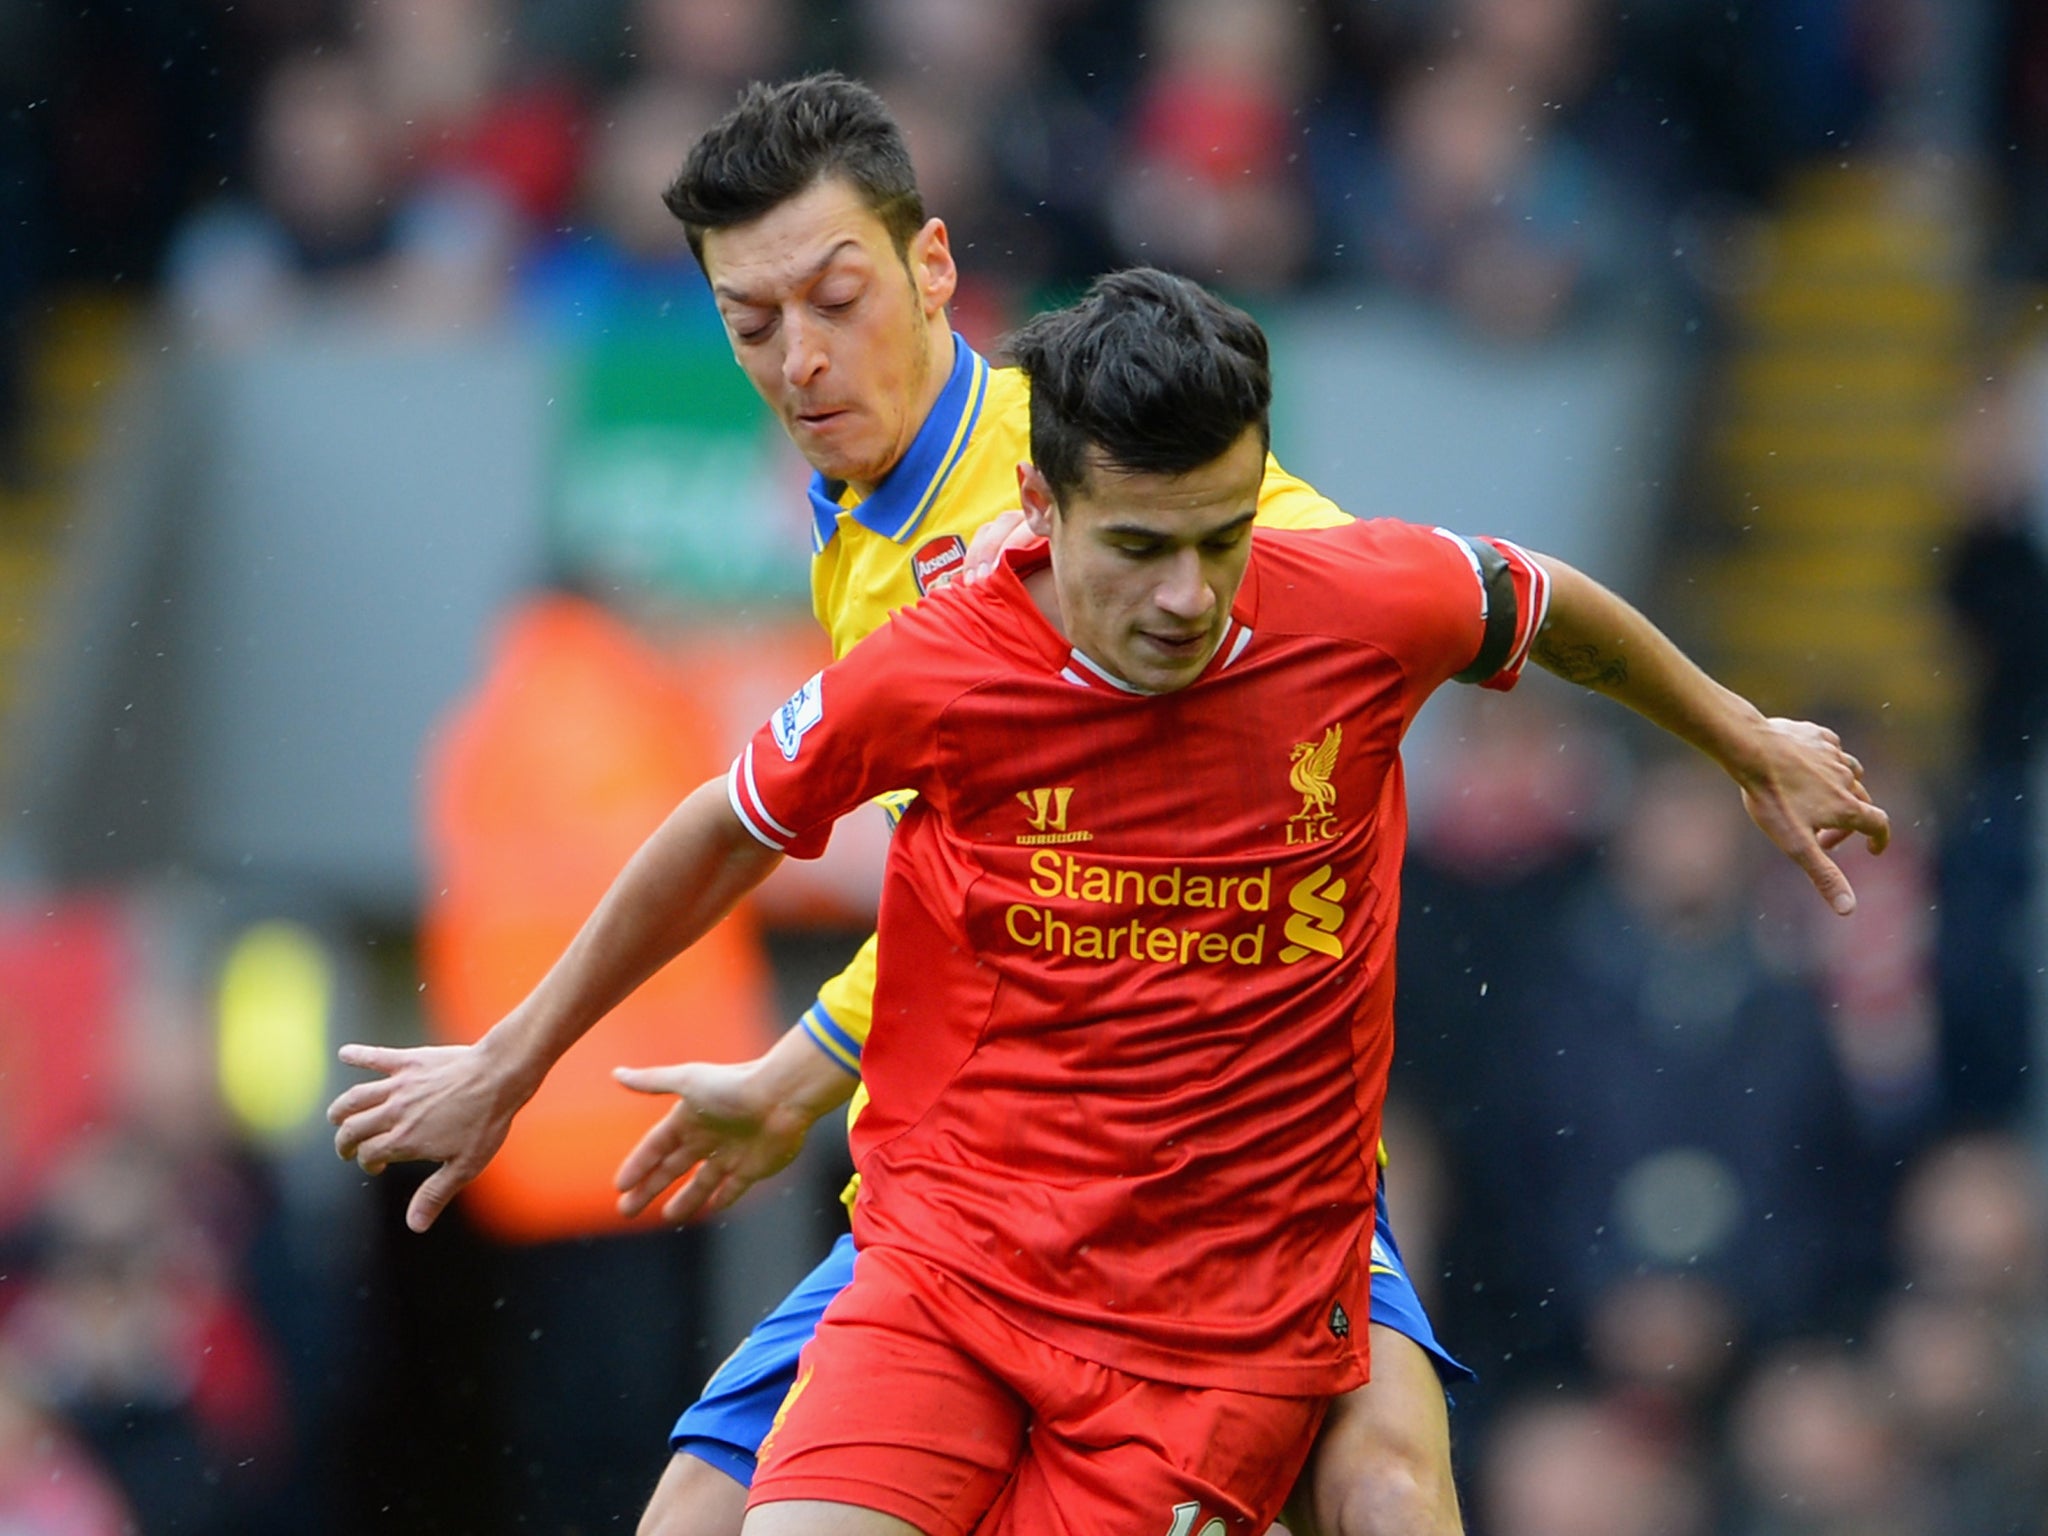 PHILIPPE COUTINHO: Showed good movement, trickery and passing and was unlucky not to get a goal - 8.